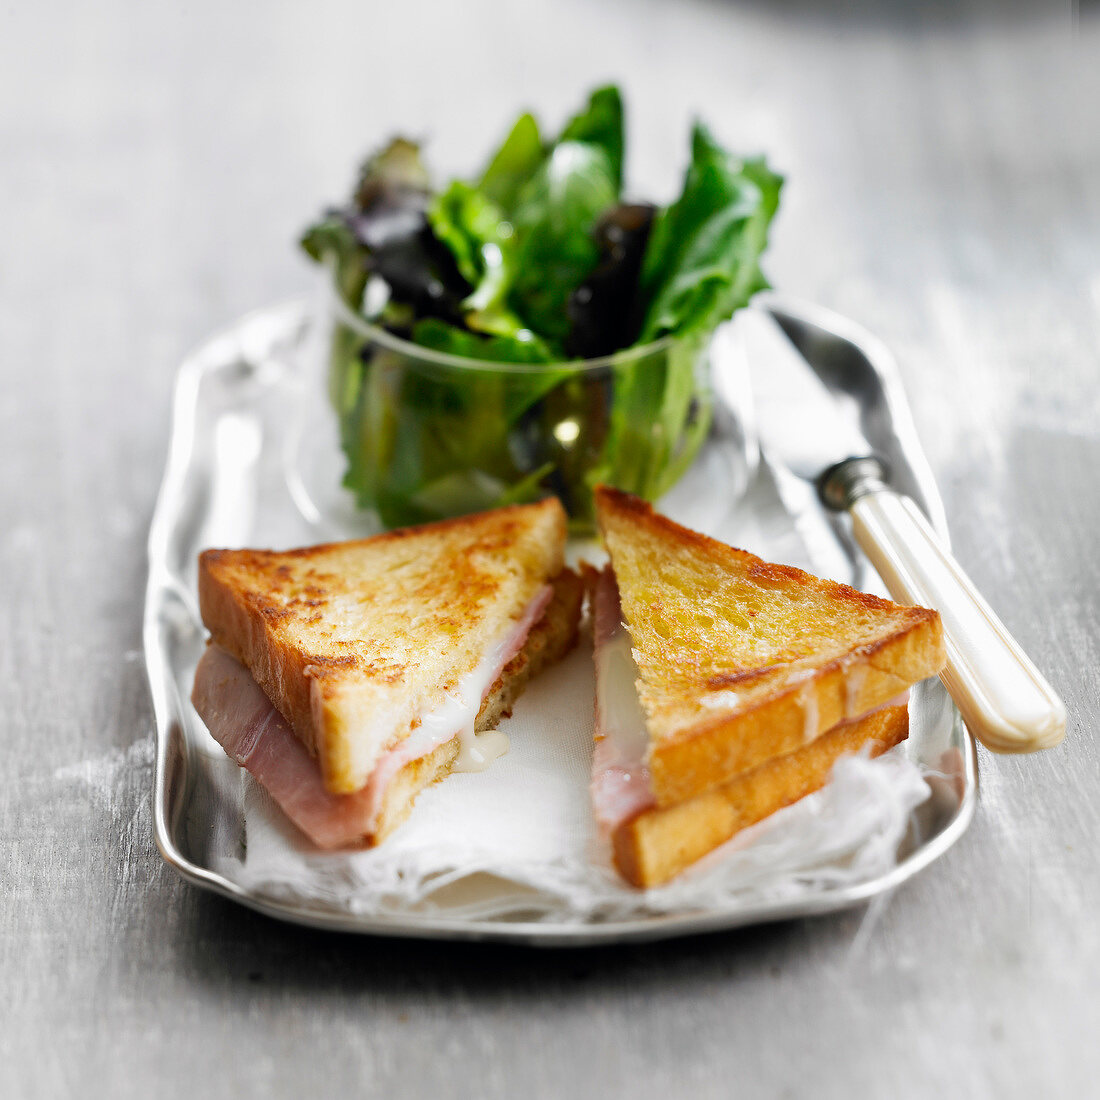 Croque-monsieur, ham and cheese toasted sandwich